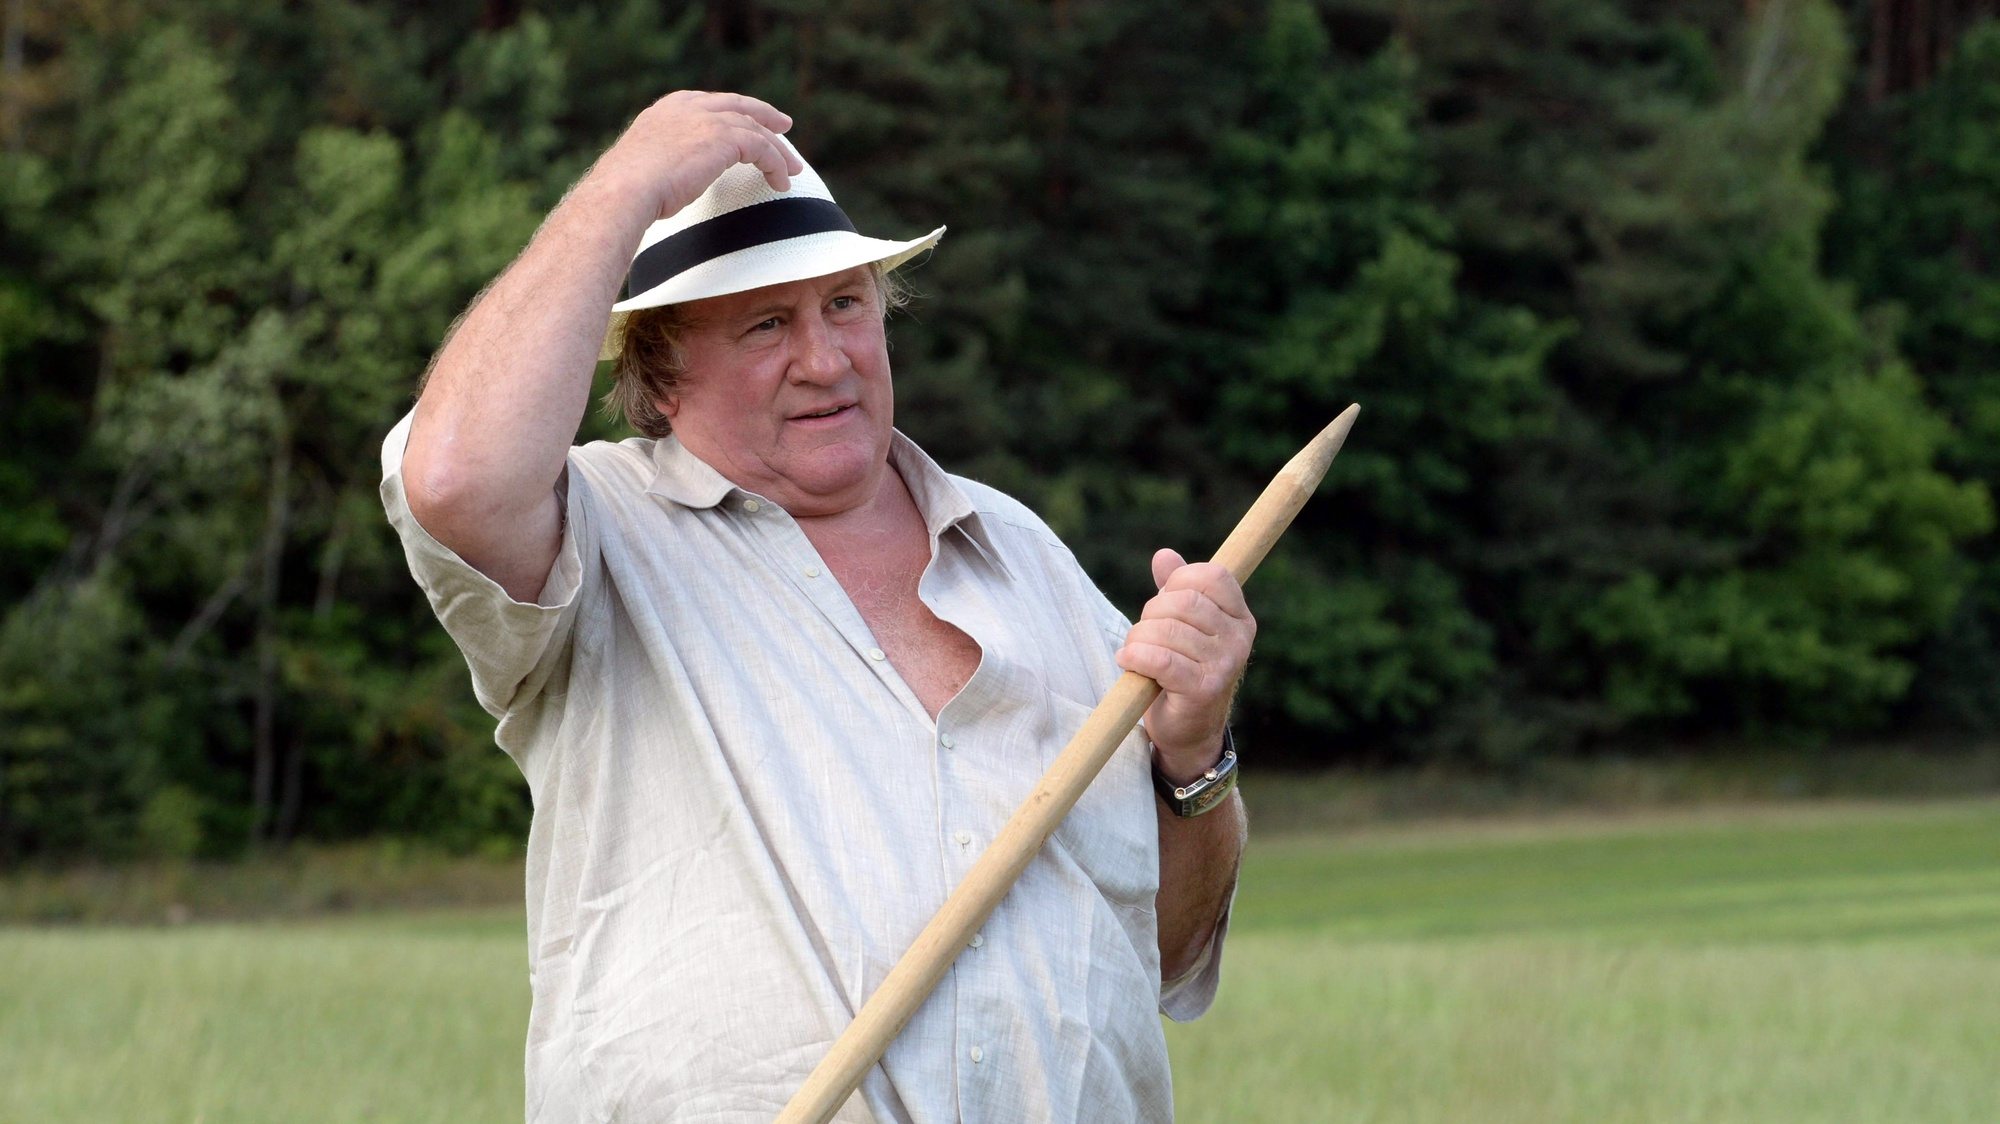 epa09032153 (FILE) - French actor Gerard Depardieu participates in hand-scything on the territory of the Ozerny official presidential residence outside Minsk, Belarus, 22 July 2015  (reissued 23 February 2021). French media citing judicial sources report on 23 February 2021 that Depardieu has been charged with rape. The French actor had already been accused of rape and sexual assault in 2018.  EPA/ANDREI STASEVICH POOL *** Local Caption *** 54851032